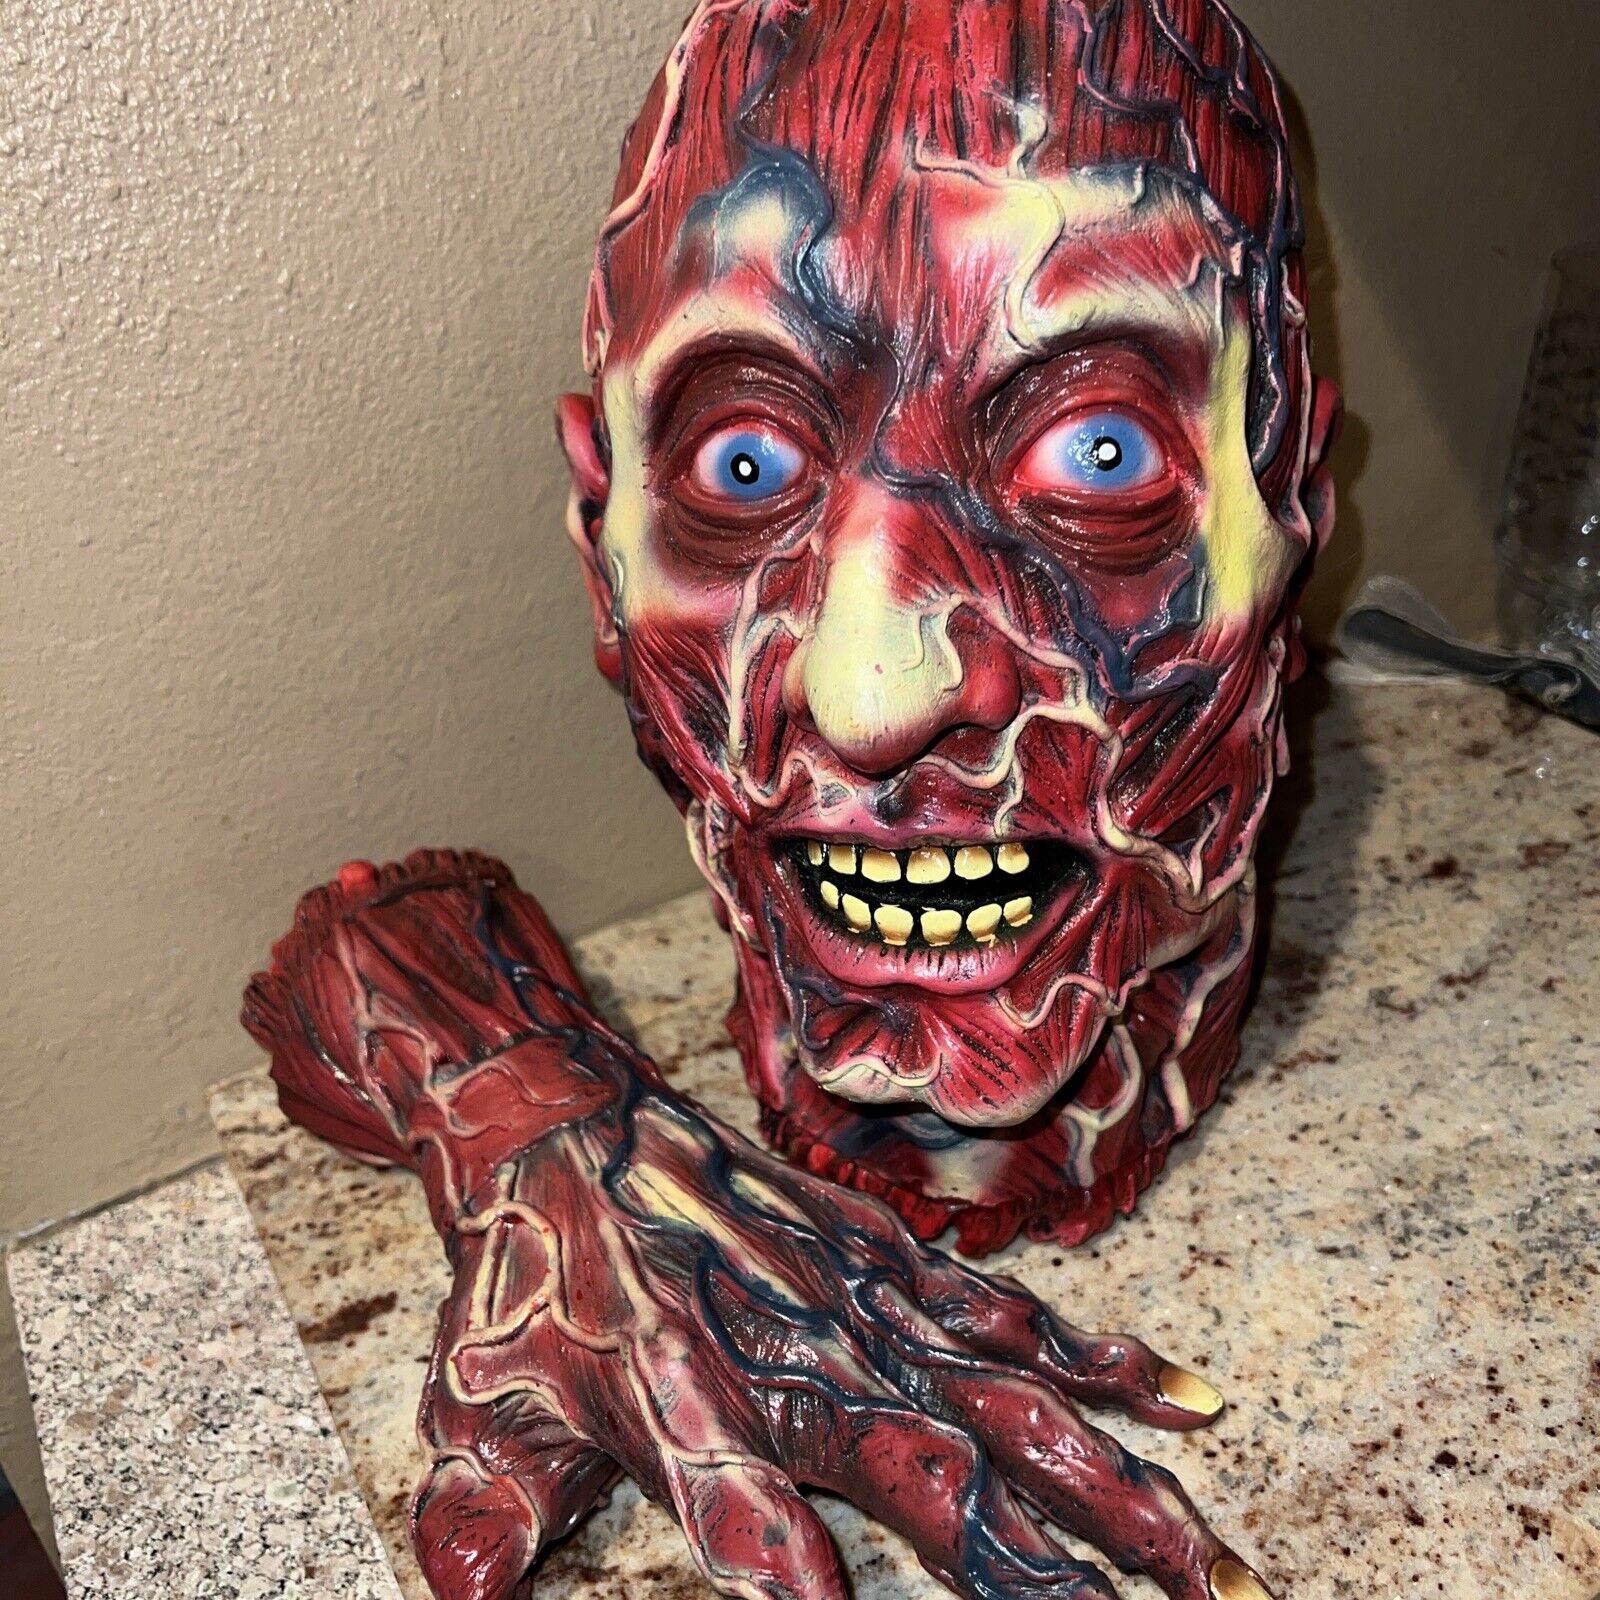 Fake Life Size Latex BLOODY SEVERED SKINNED HEAD & HAND Zombie Horror Decoration